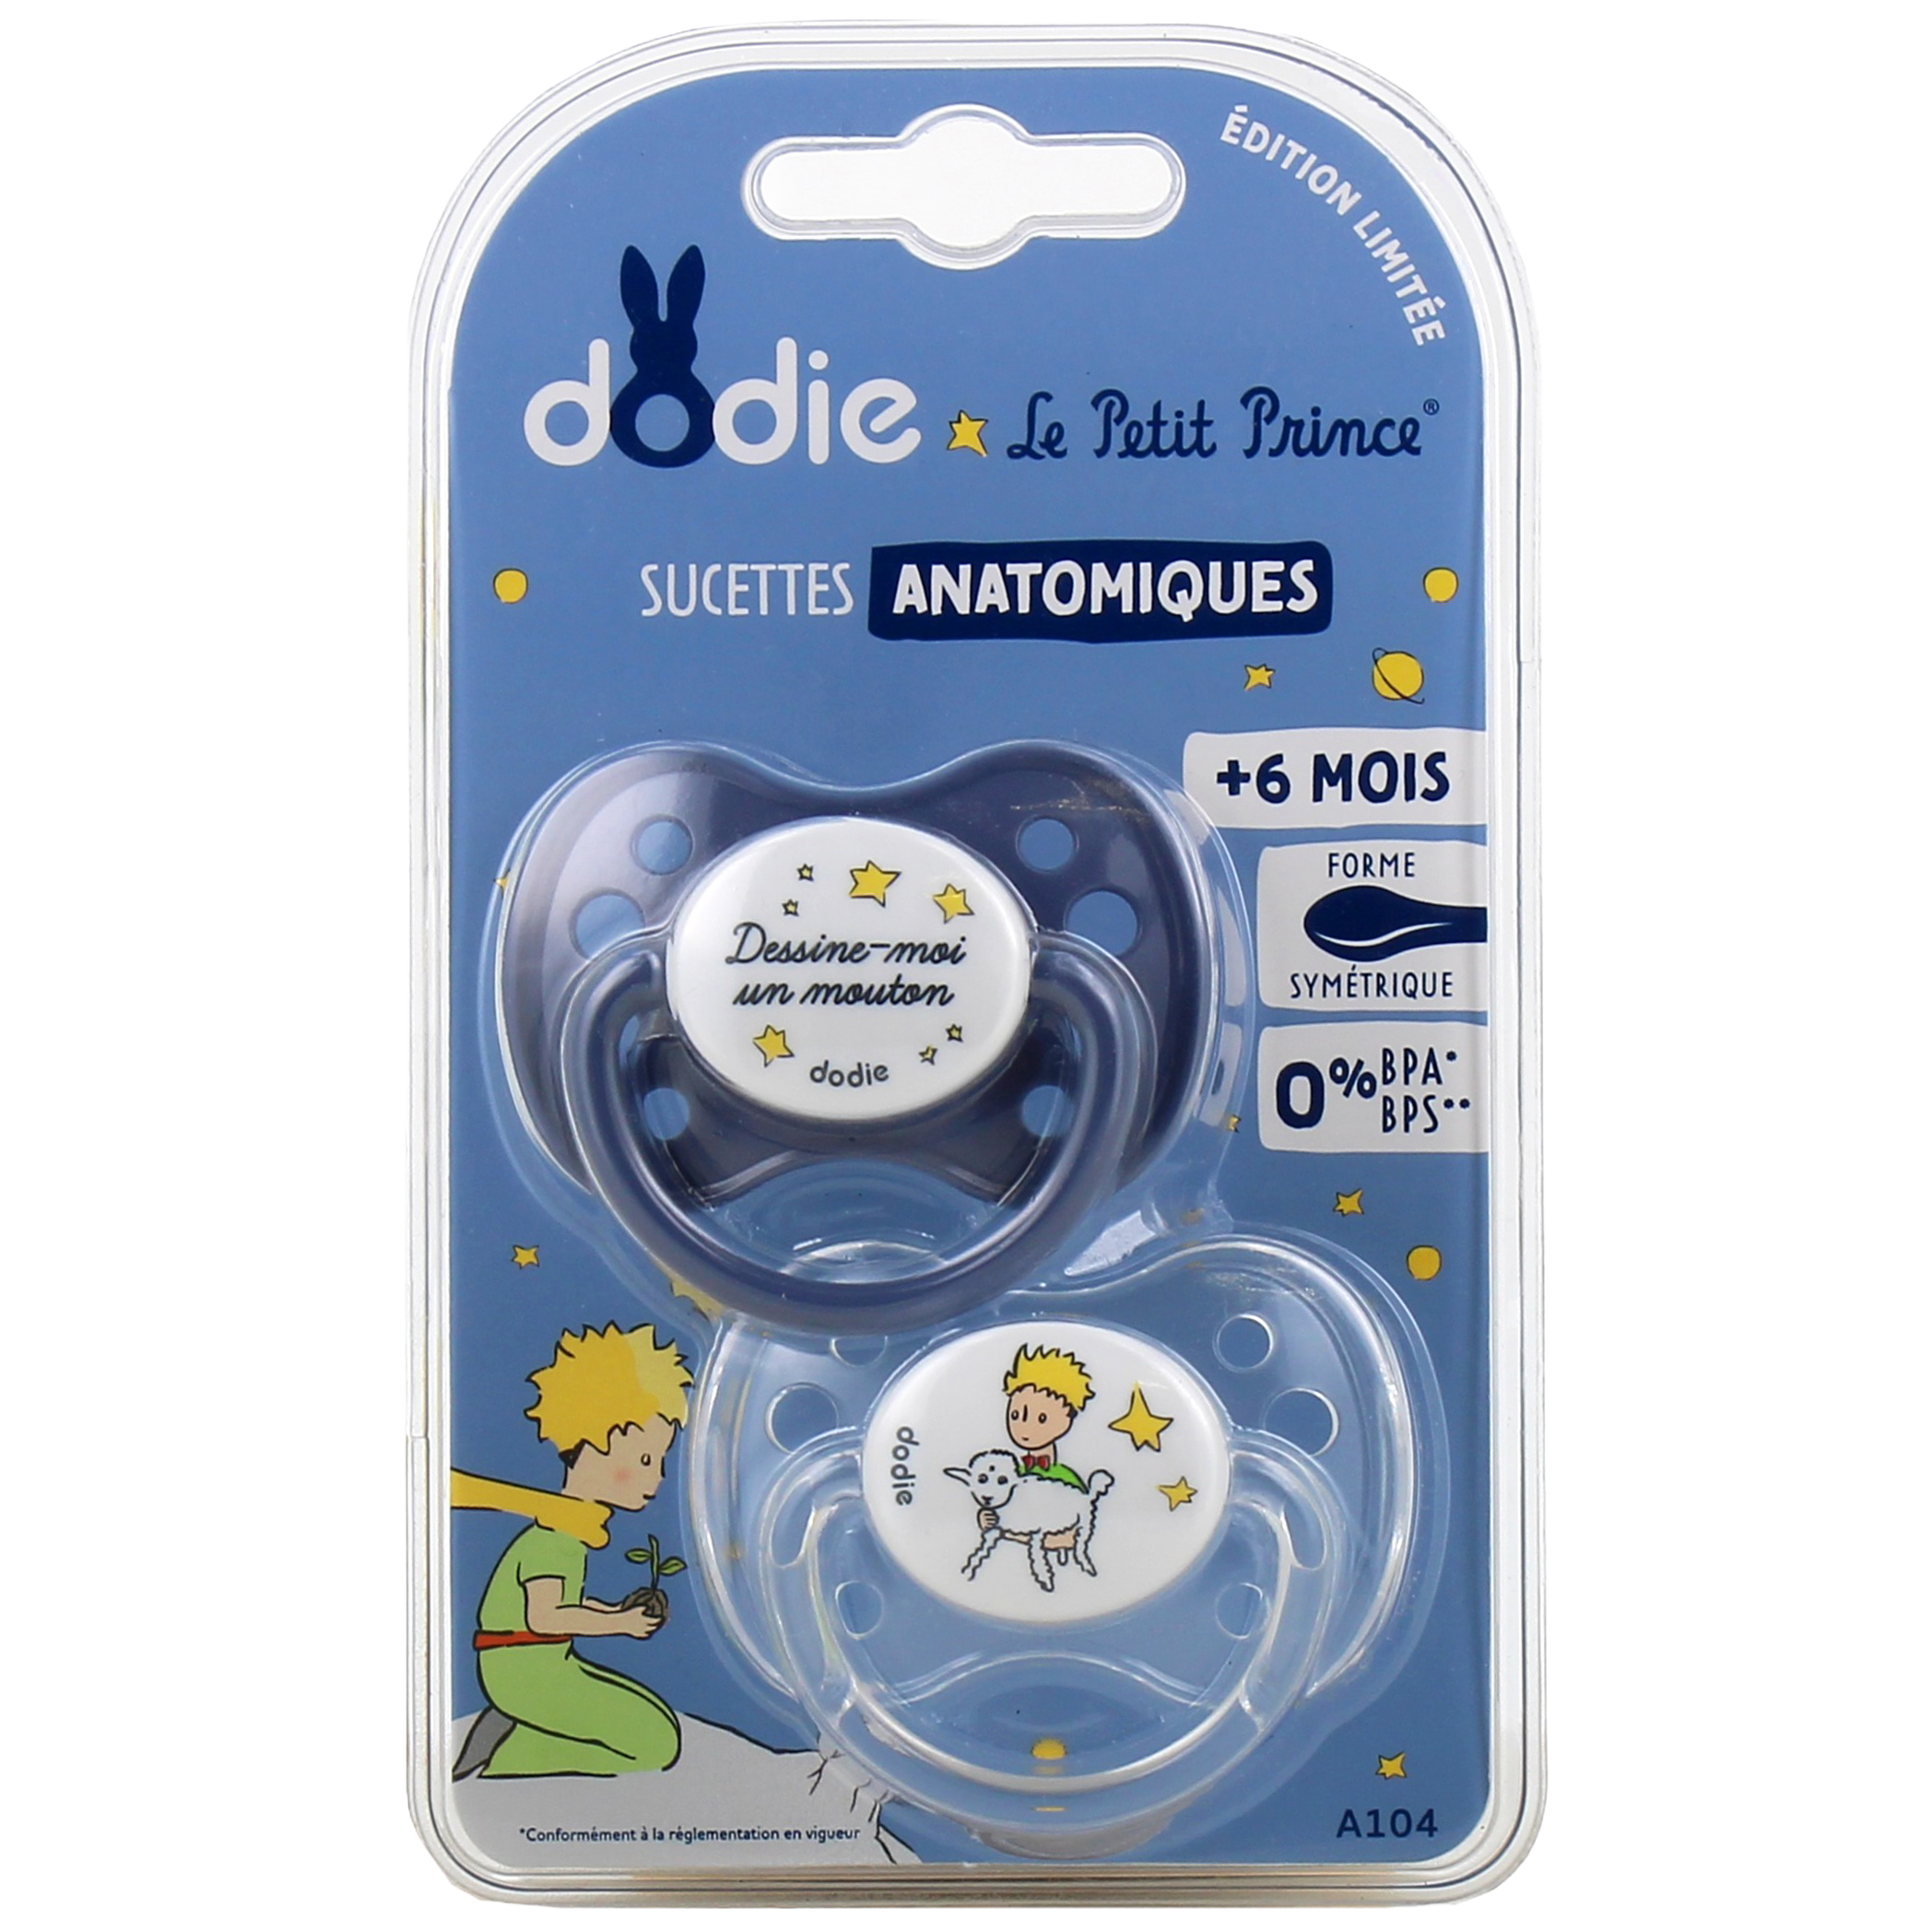 Dodie Sucette Anatomique Nuit Silicone 0-6 mois A96